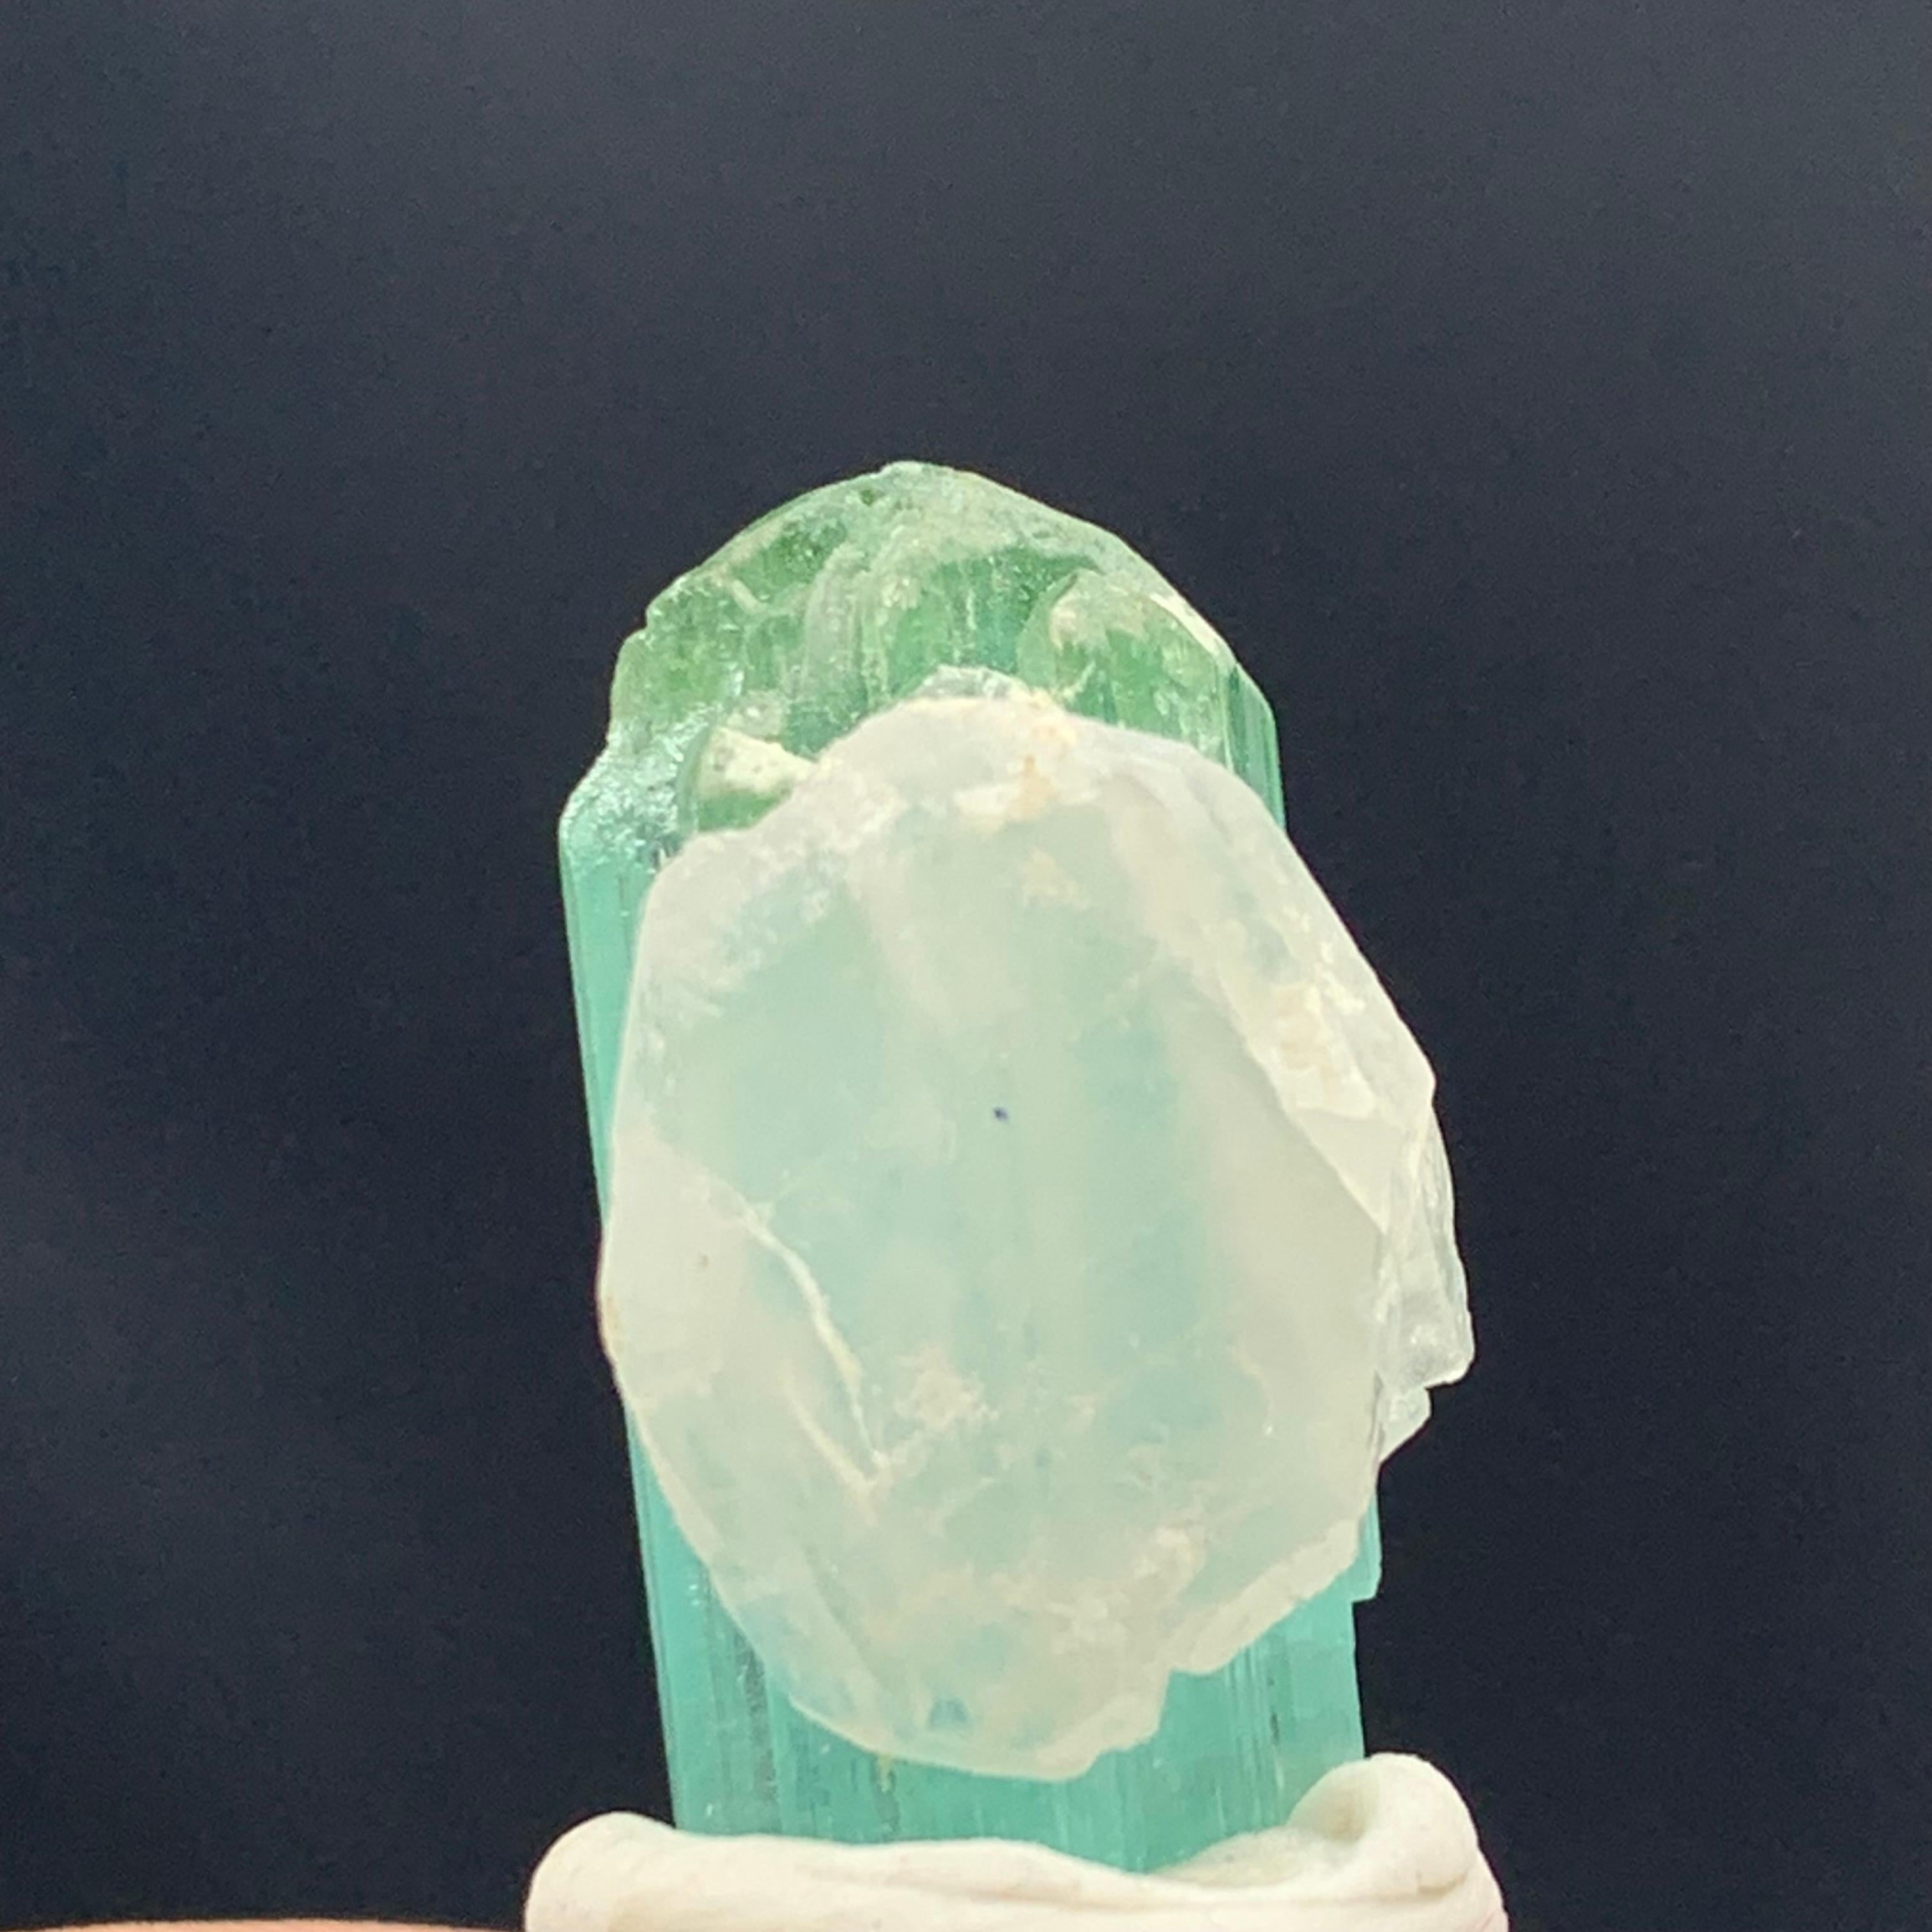 18th Century and Earlier 20.95 Carat Adorable Seafoam Tourmaline Specimen From Kunar, Afghanistan For Sale